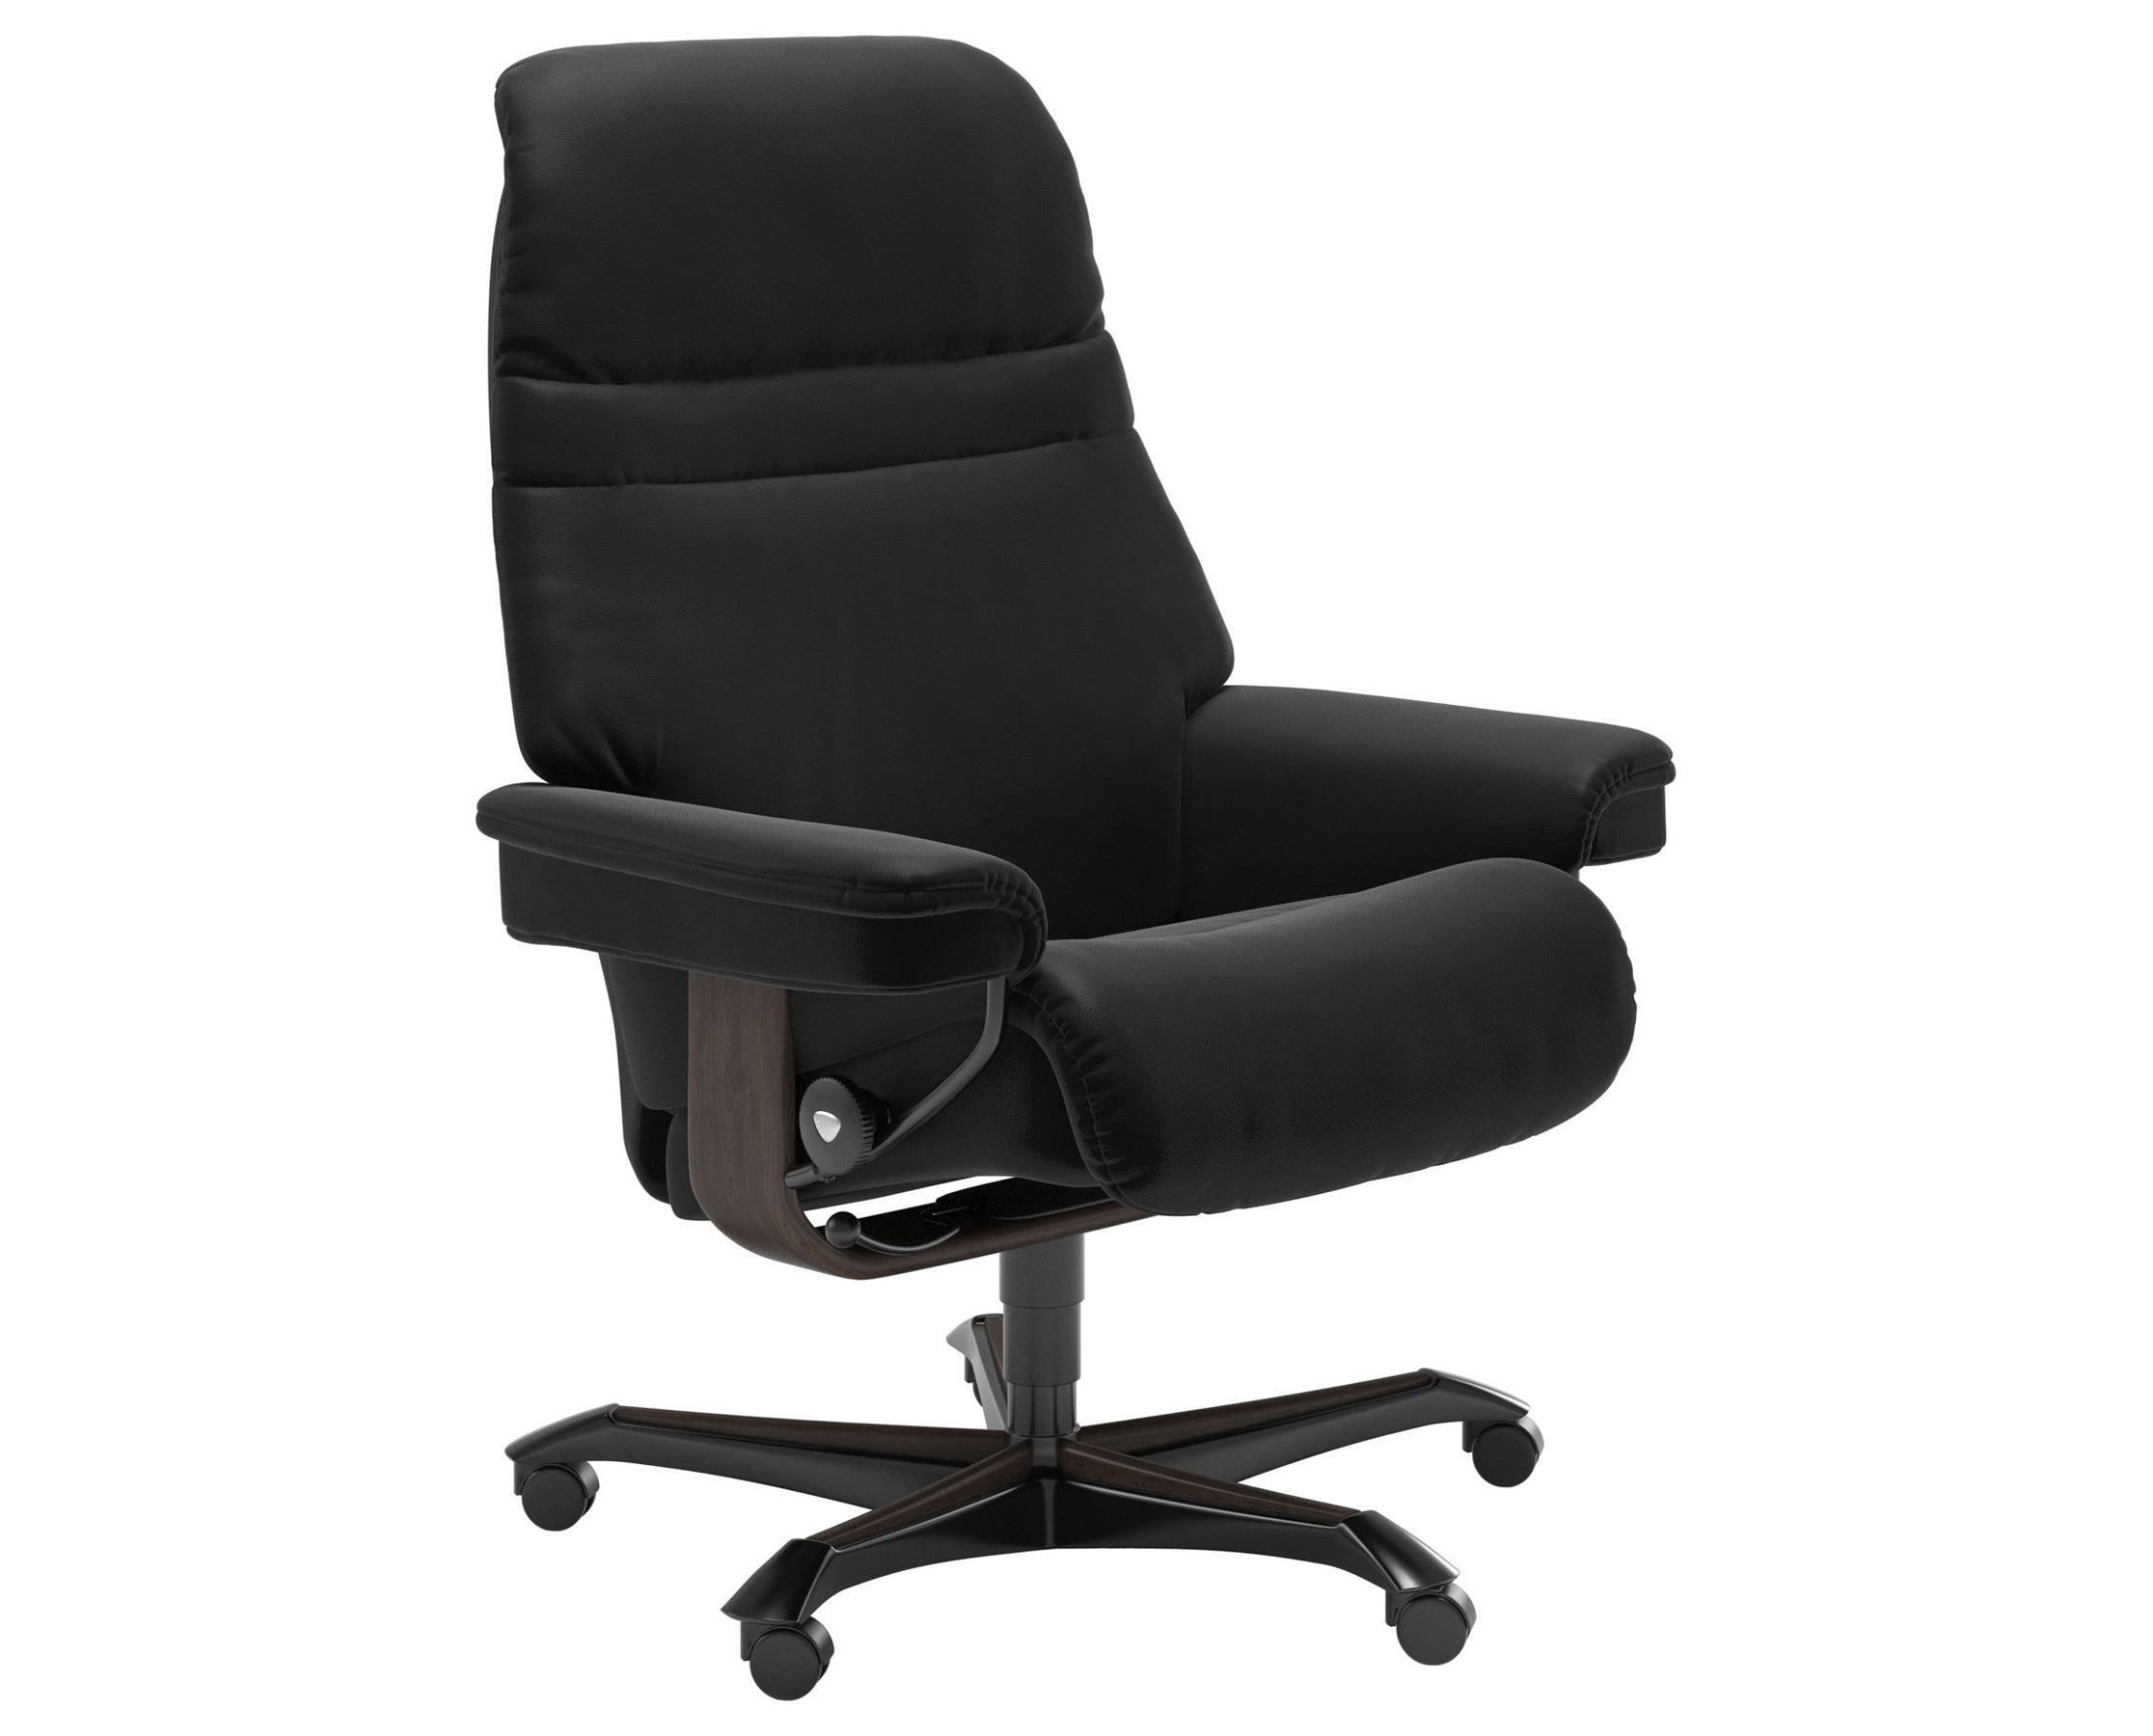 Paloma Leather Black M and Wenge Base | Stressless Sunrise Home Office Chair | Valley Ridge Furniture